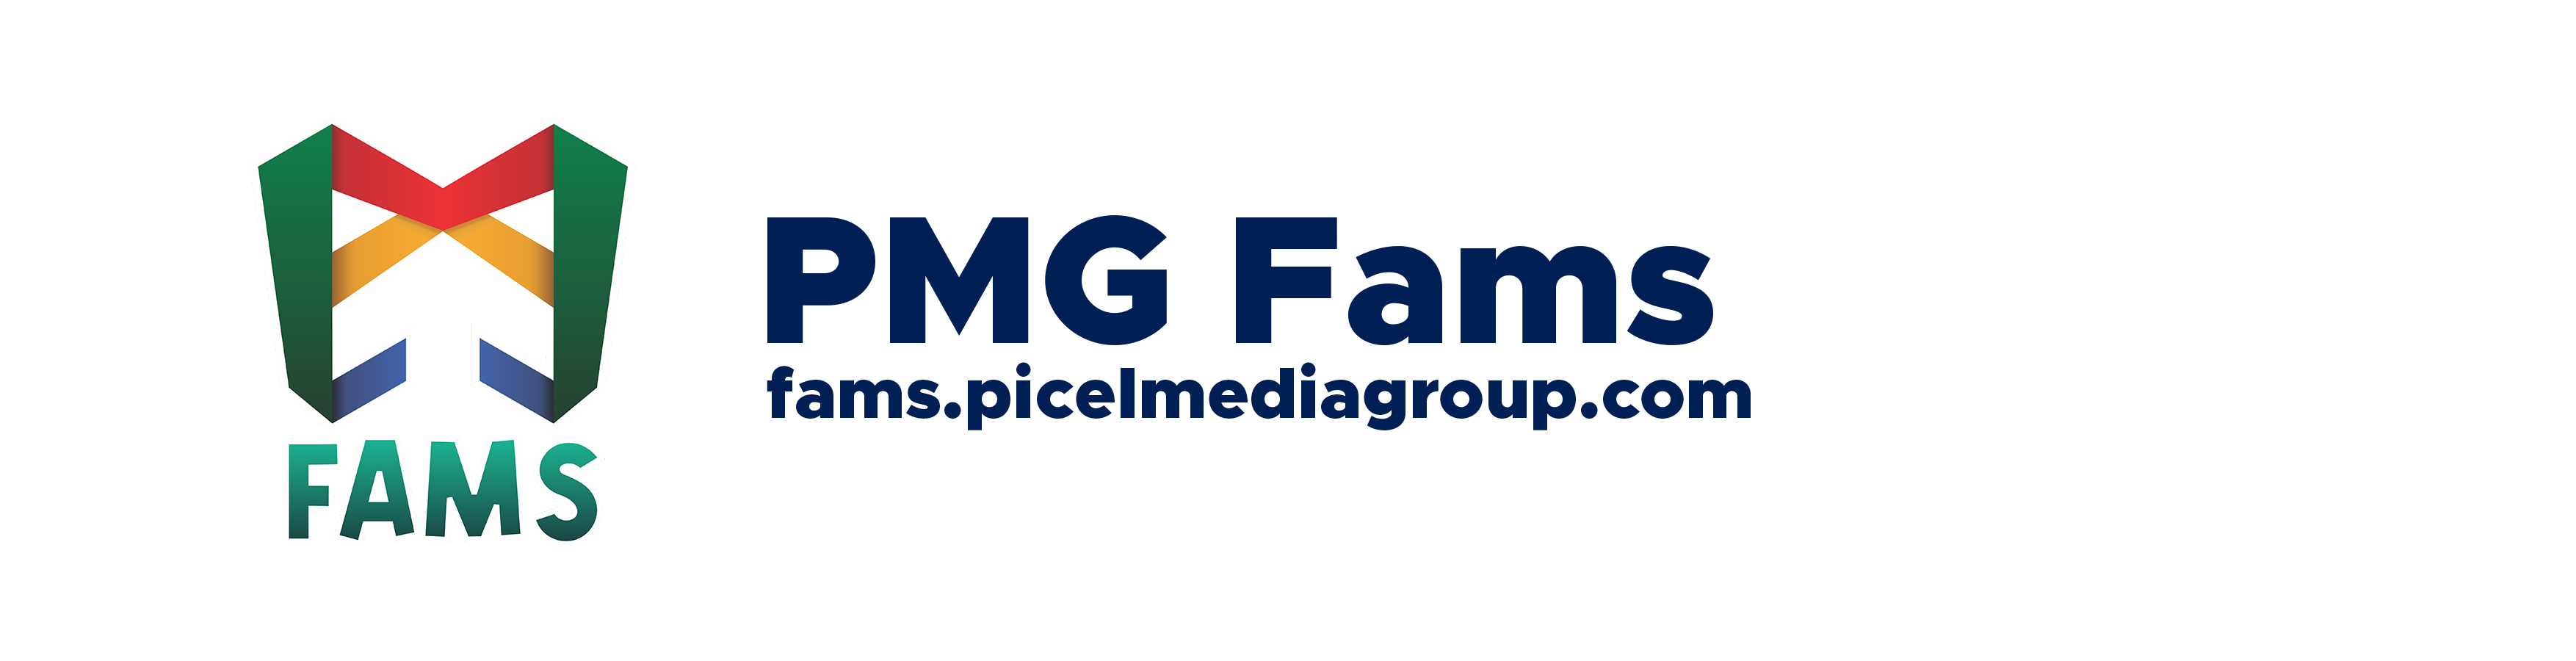 PMG Fams Official Website